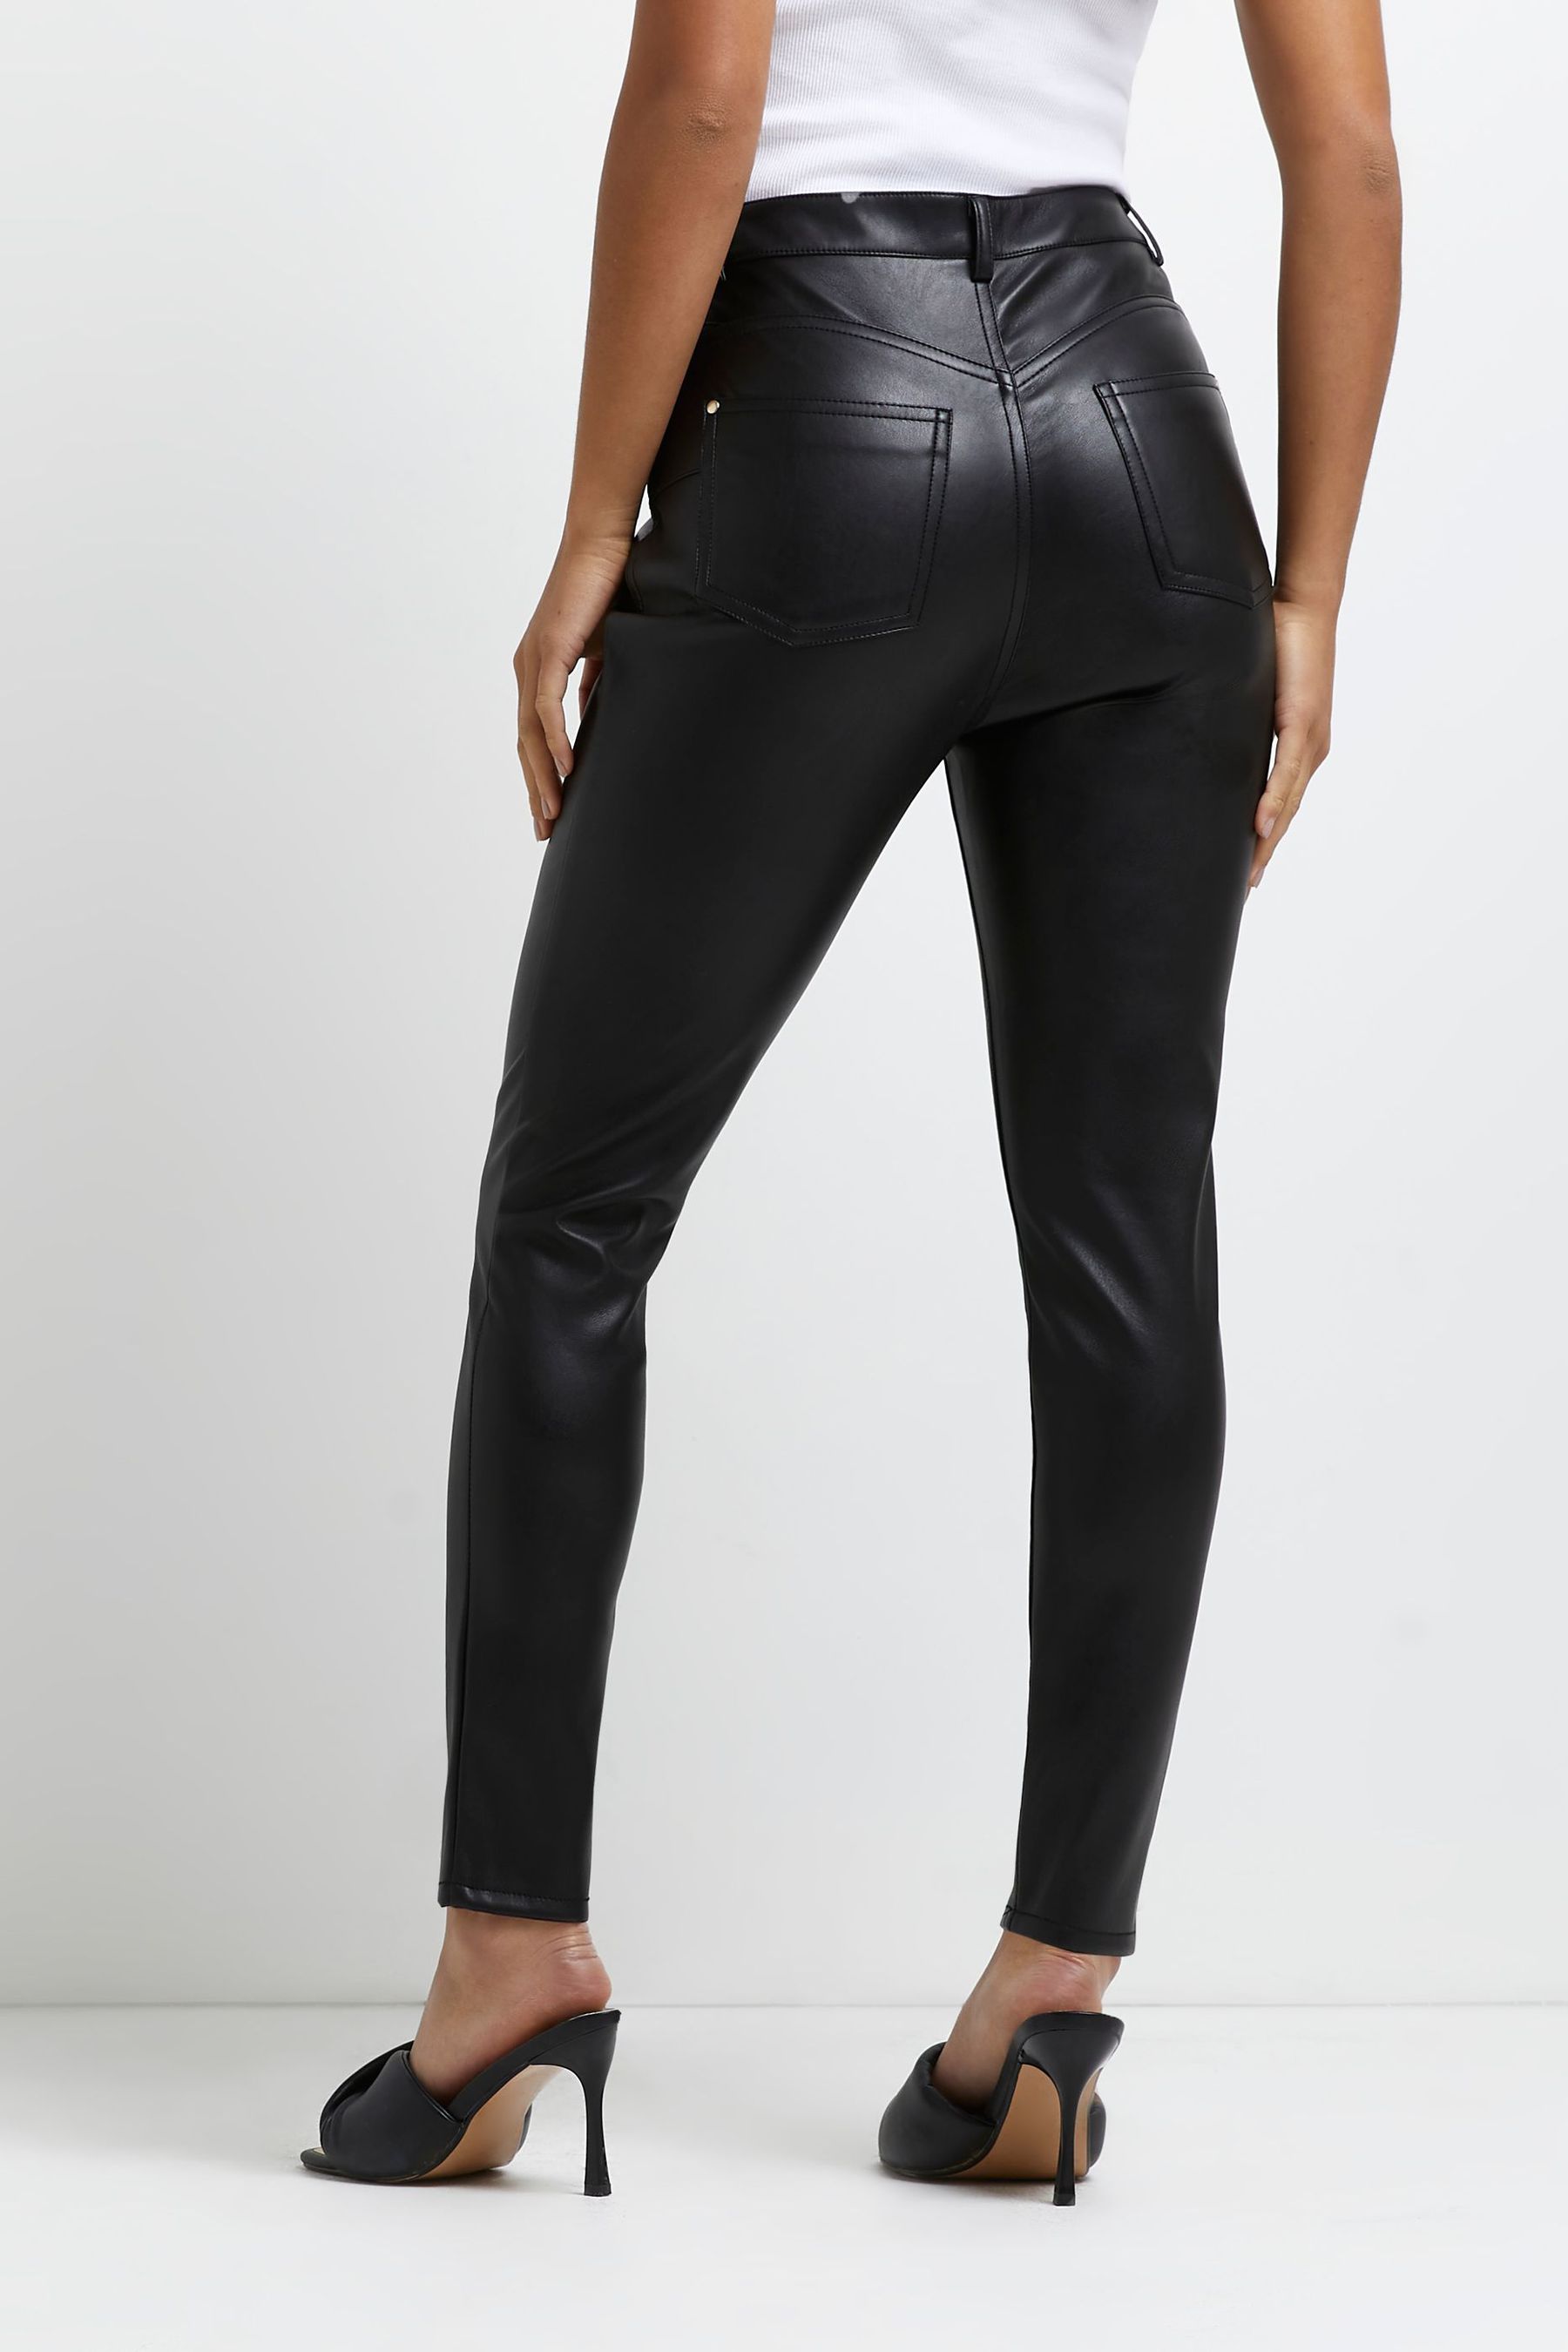 Buy River Island Black Petite Faux Leather Bum Sculpt Trousers from the ...